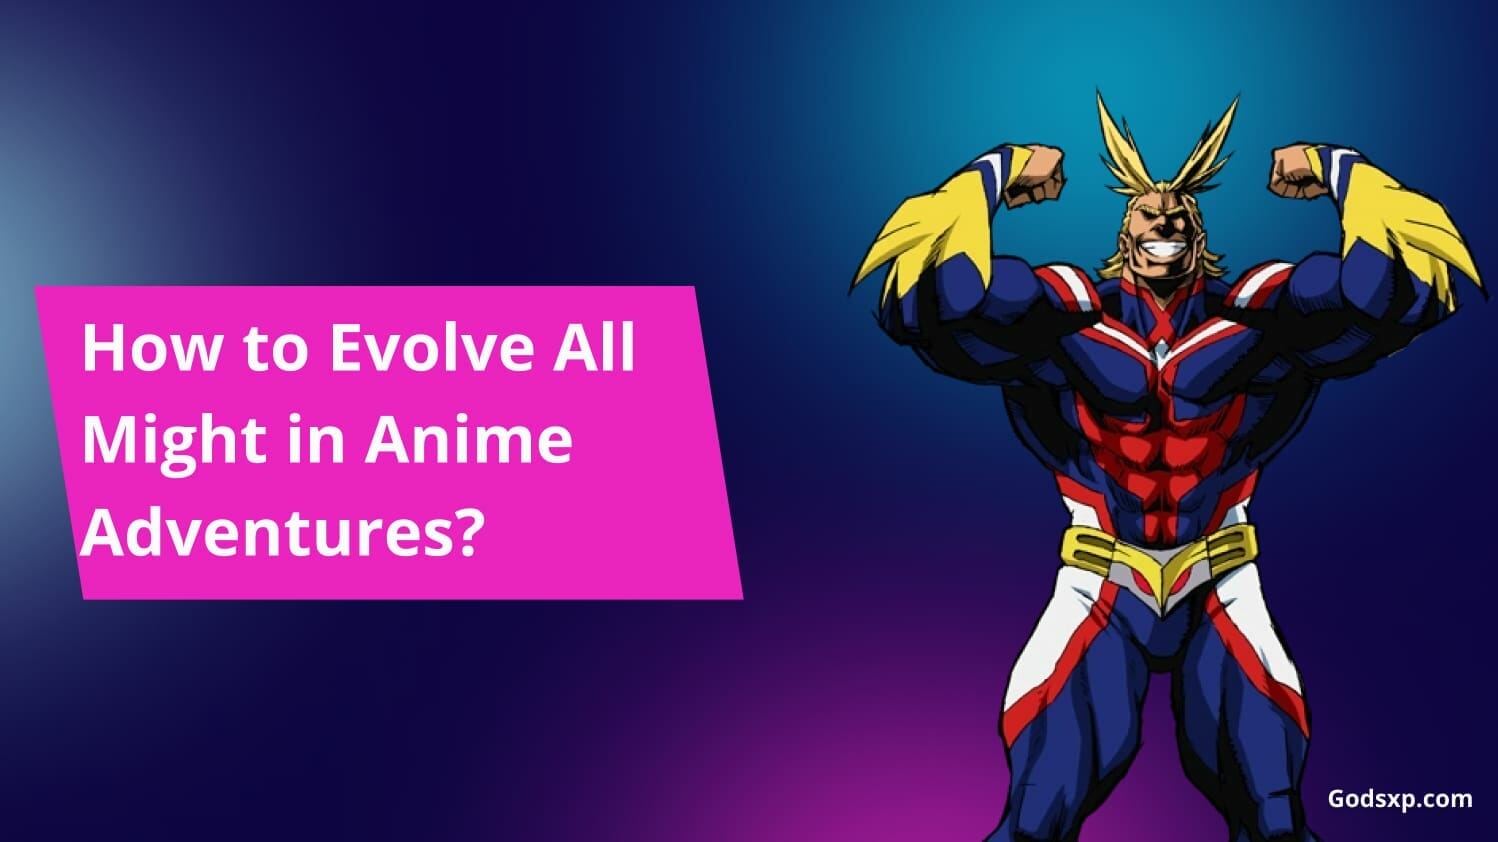 Evolve All Might in Anime Adventures